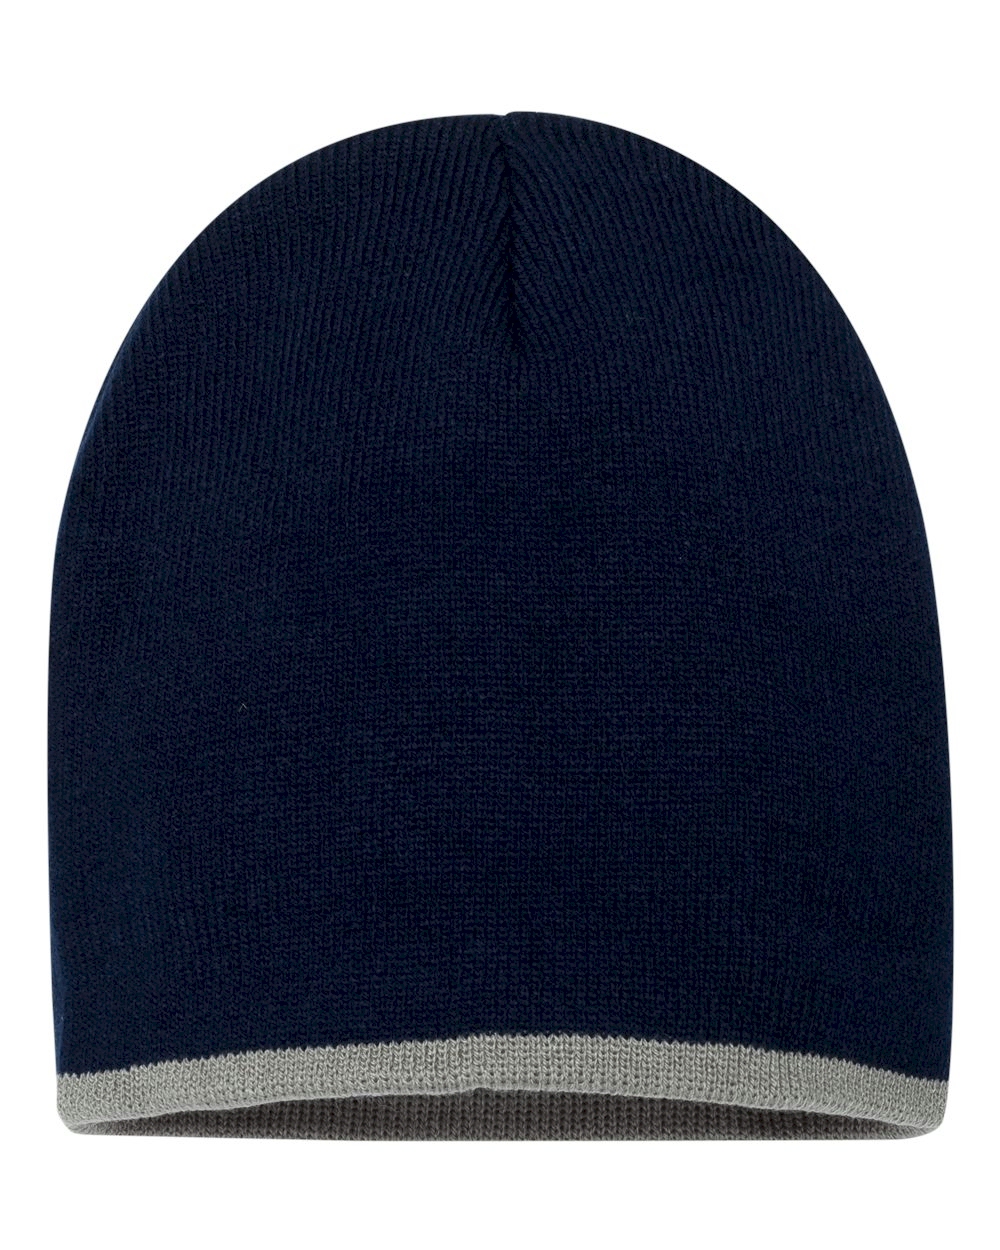 8" Knit Beanie with Striped Bottom Embroidery Blanks - NAVY/GRAY